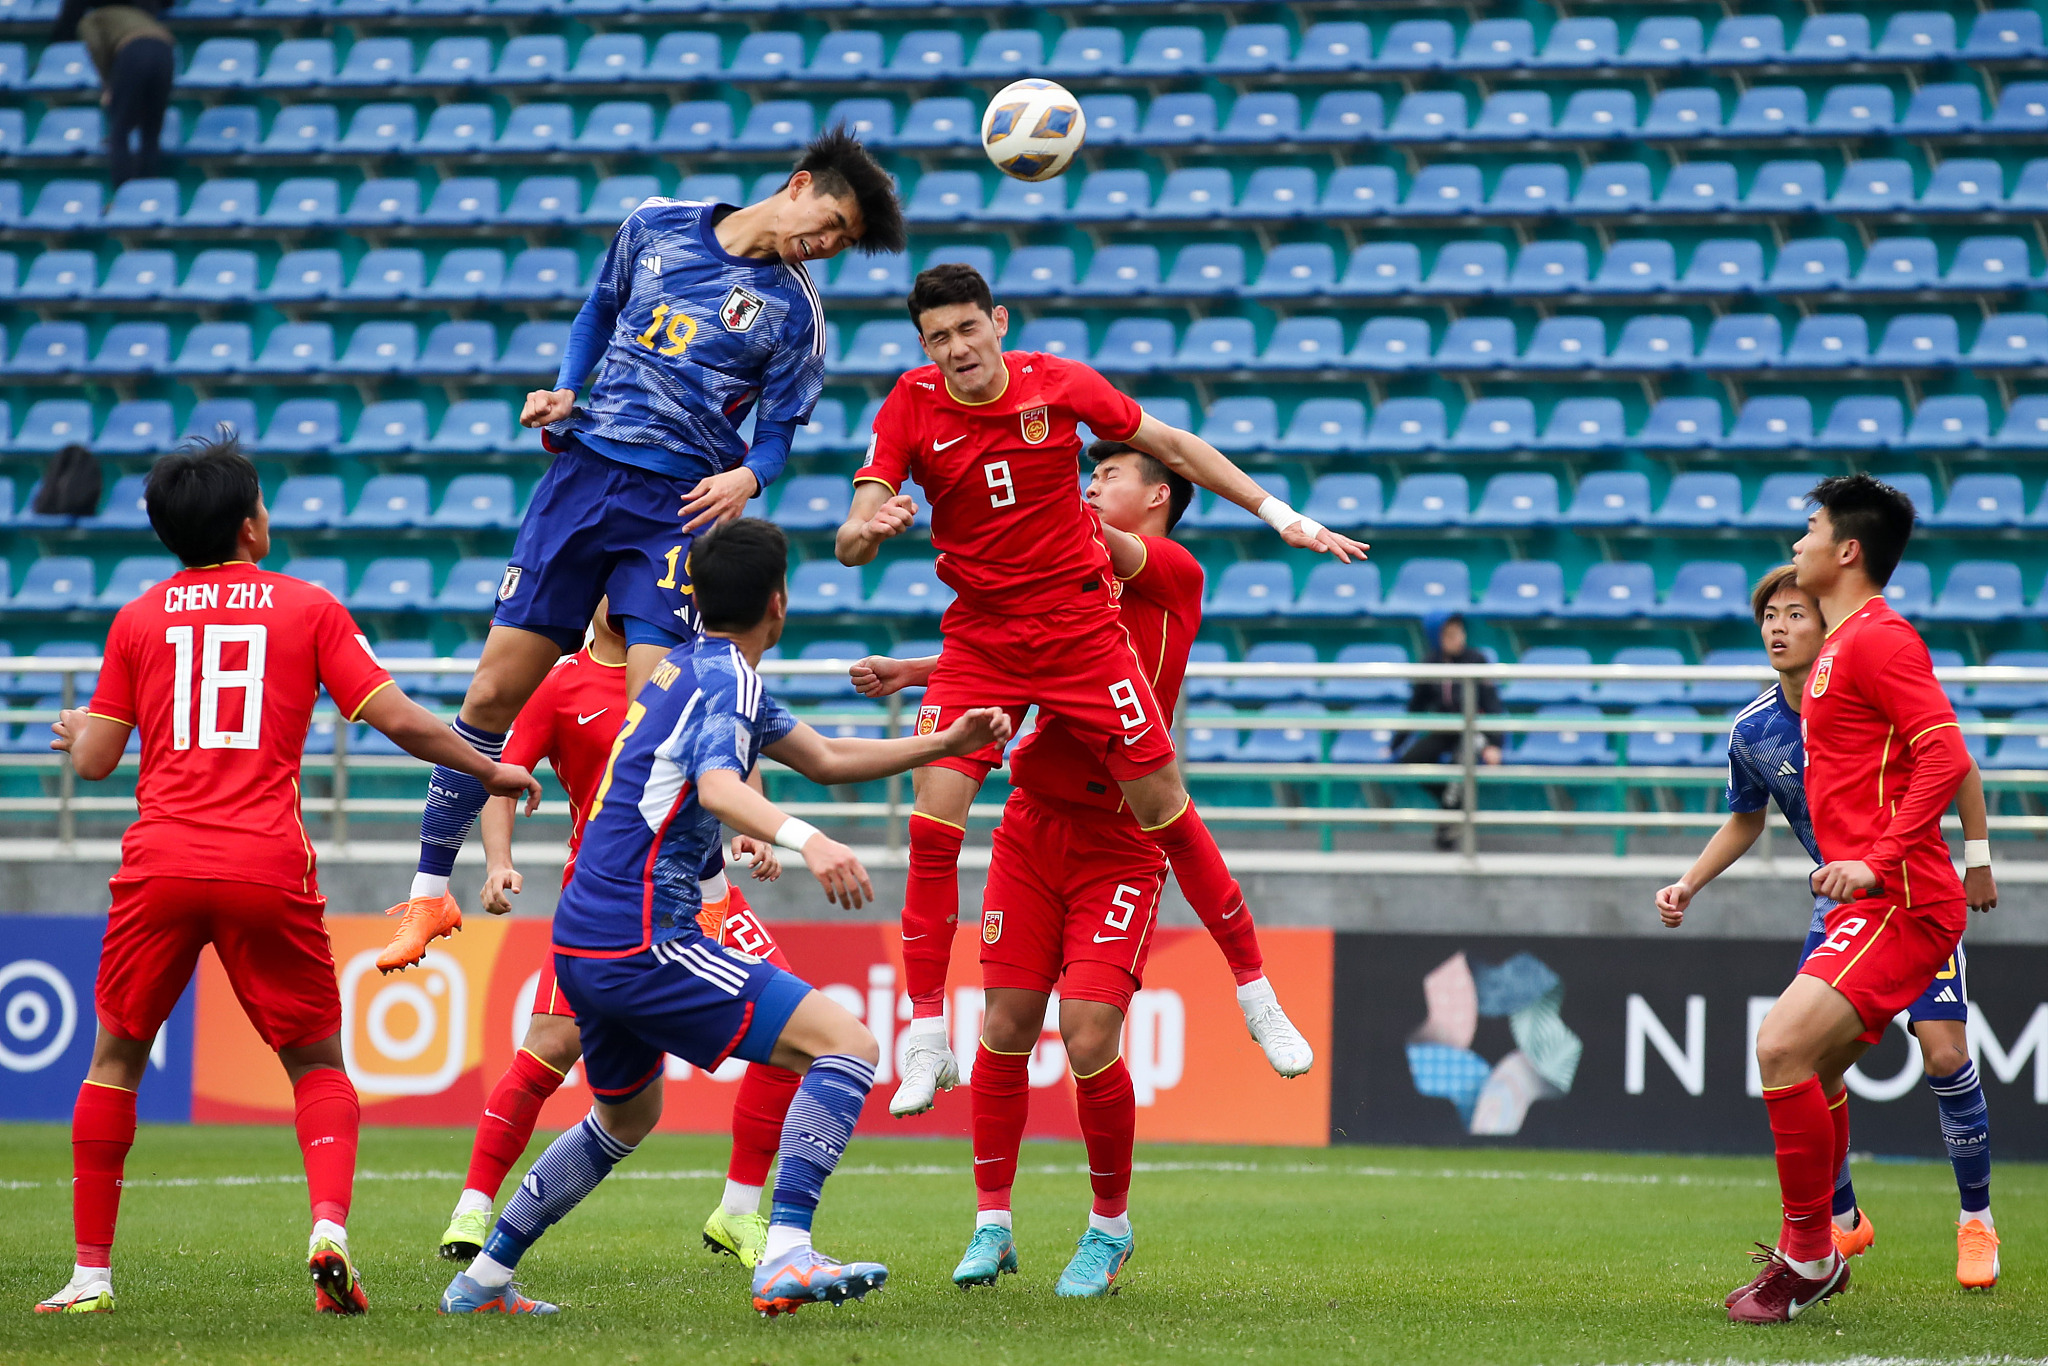 Players of China (red) and Japan battle for the ball during the AFC U20 men's Asian Cup in Tashkent, Uzbekistan, March 3, 2023. /CFP